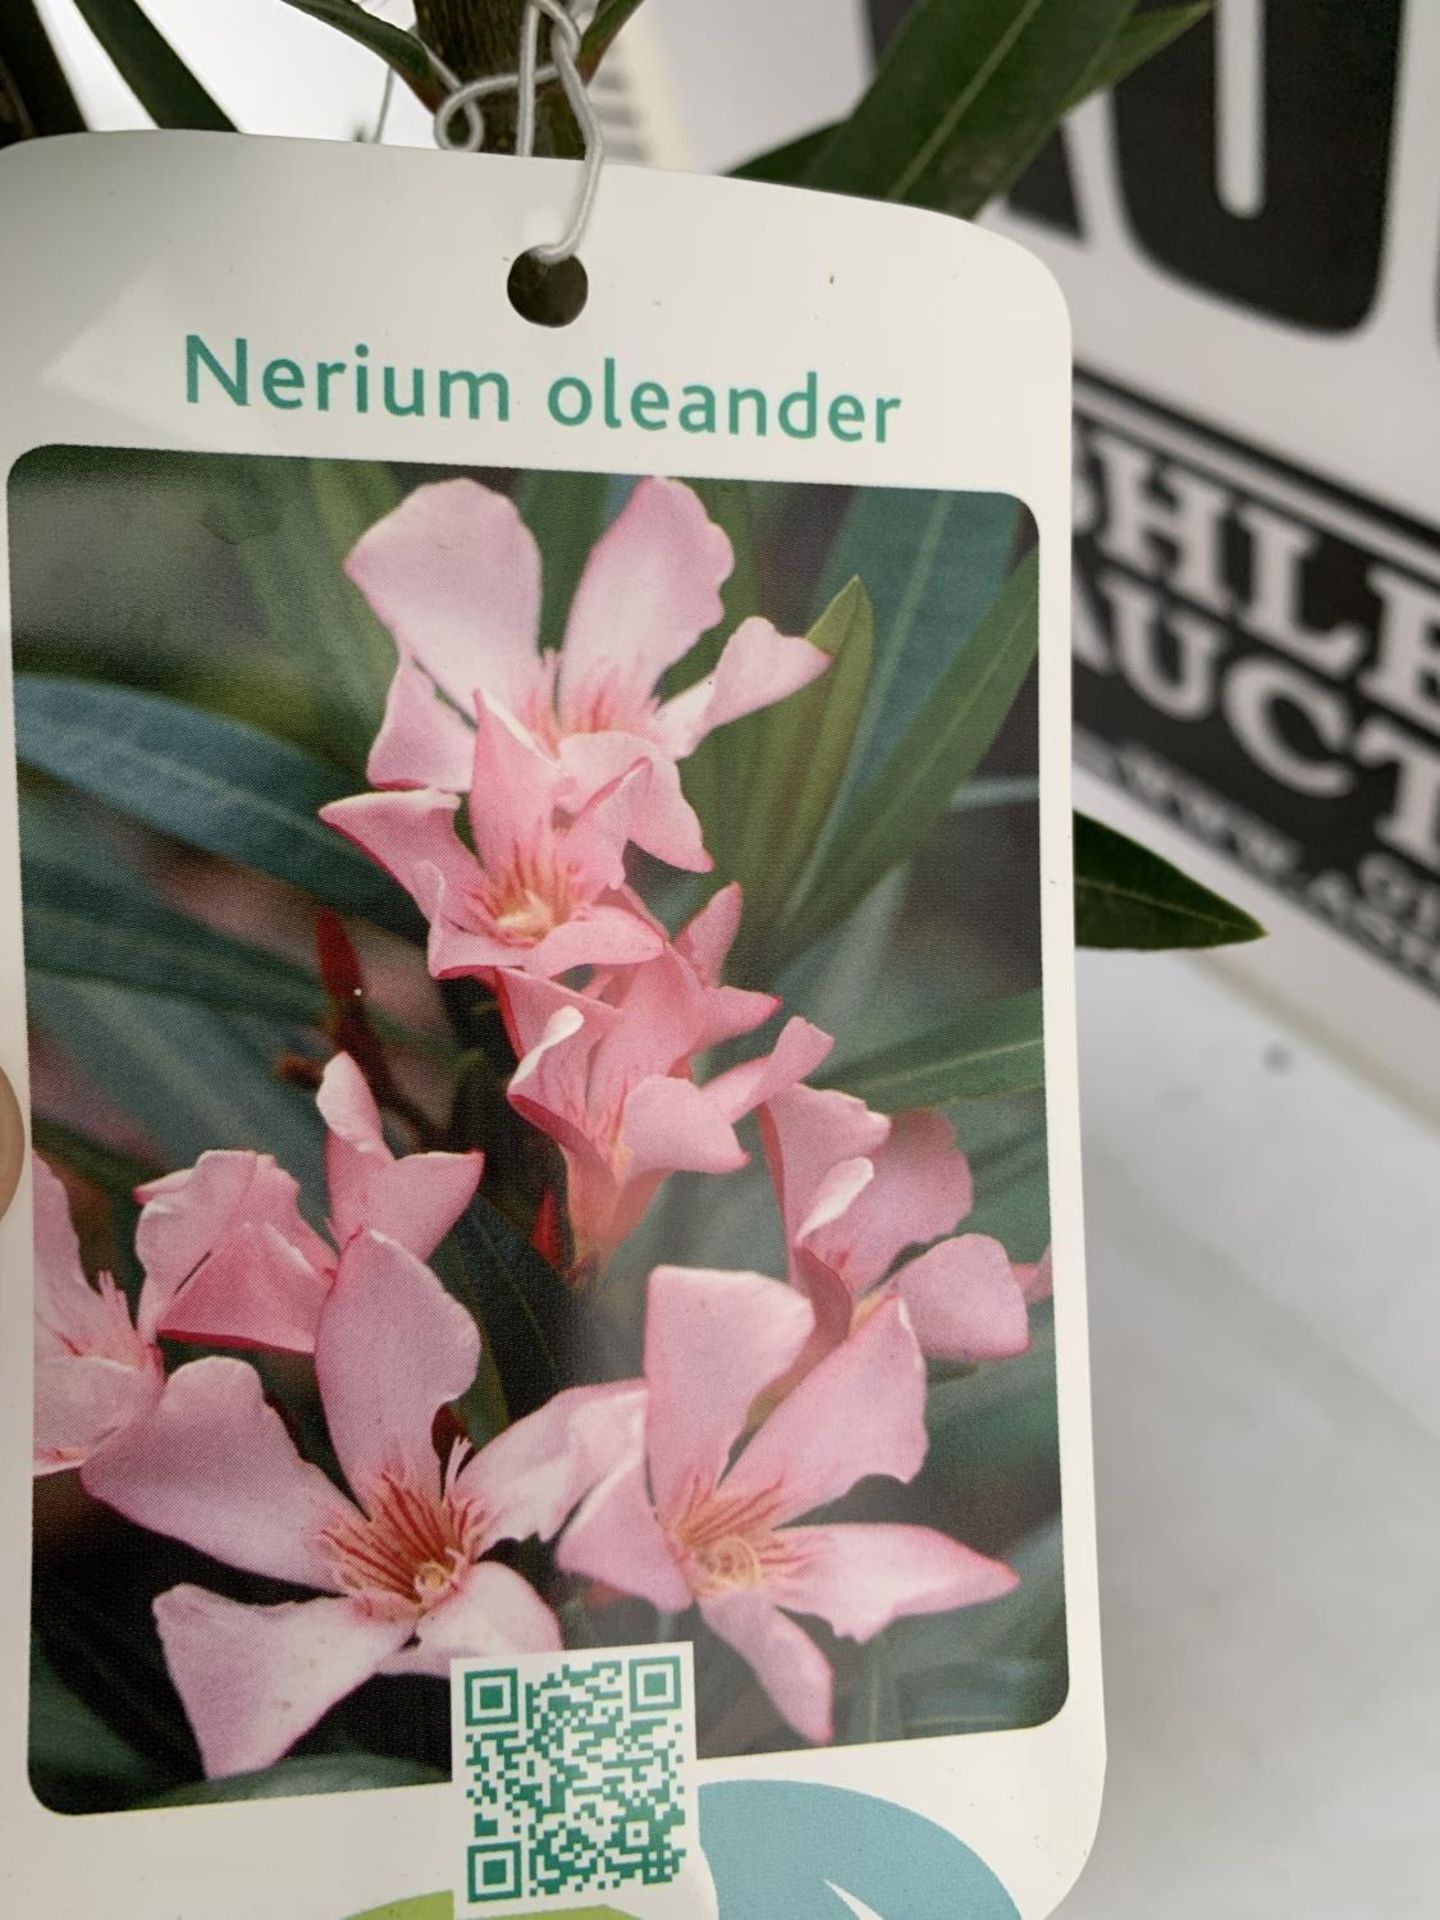 TWO LARGE OLEANDER NERIUM PINK APPROX 90CM IN HEIGHT IN 10 LTR POTS PLUS VAT TO BE SOLD FOR THE TWO - Image 4 of 6